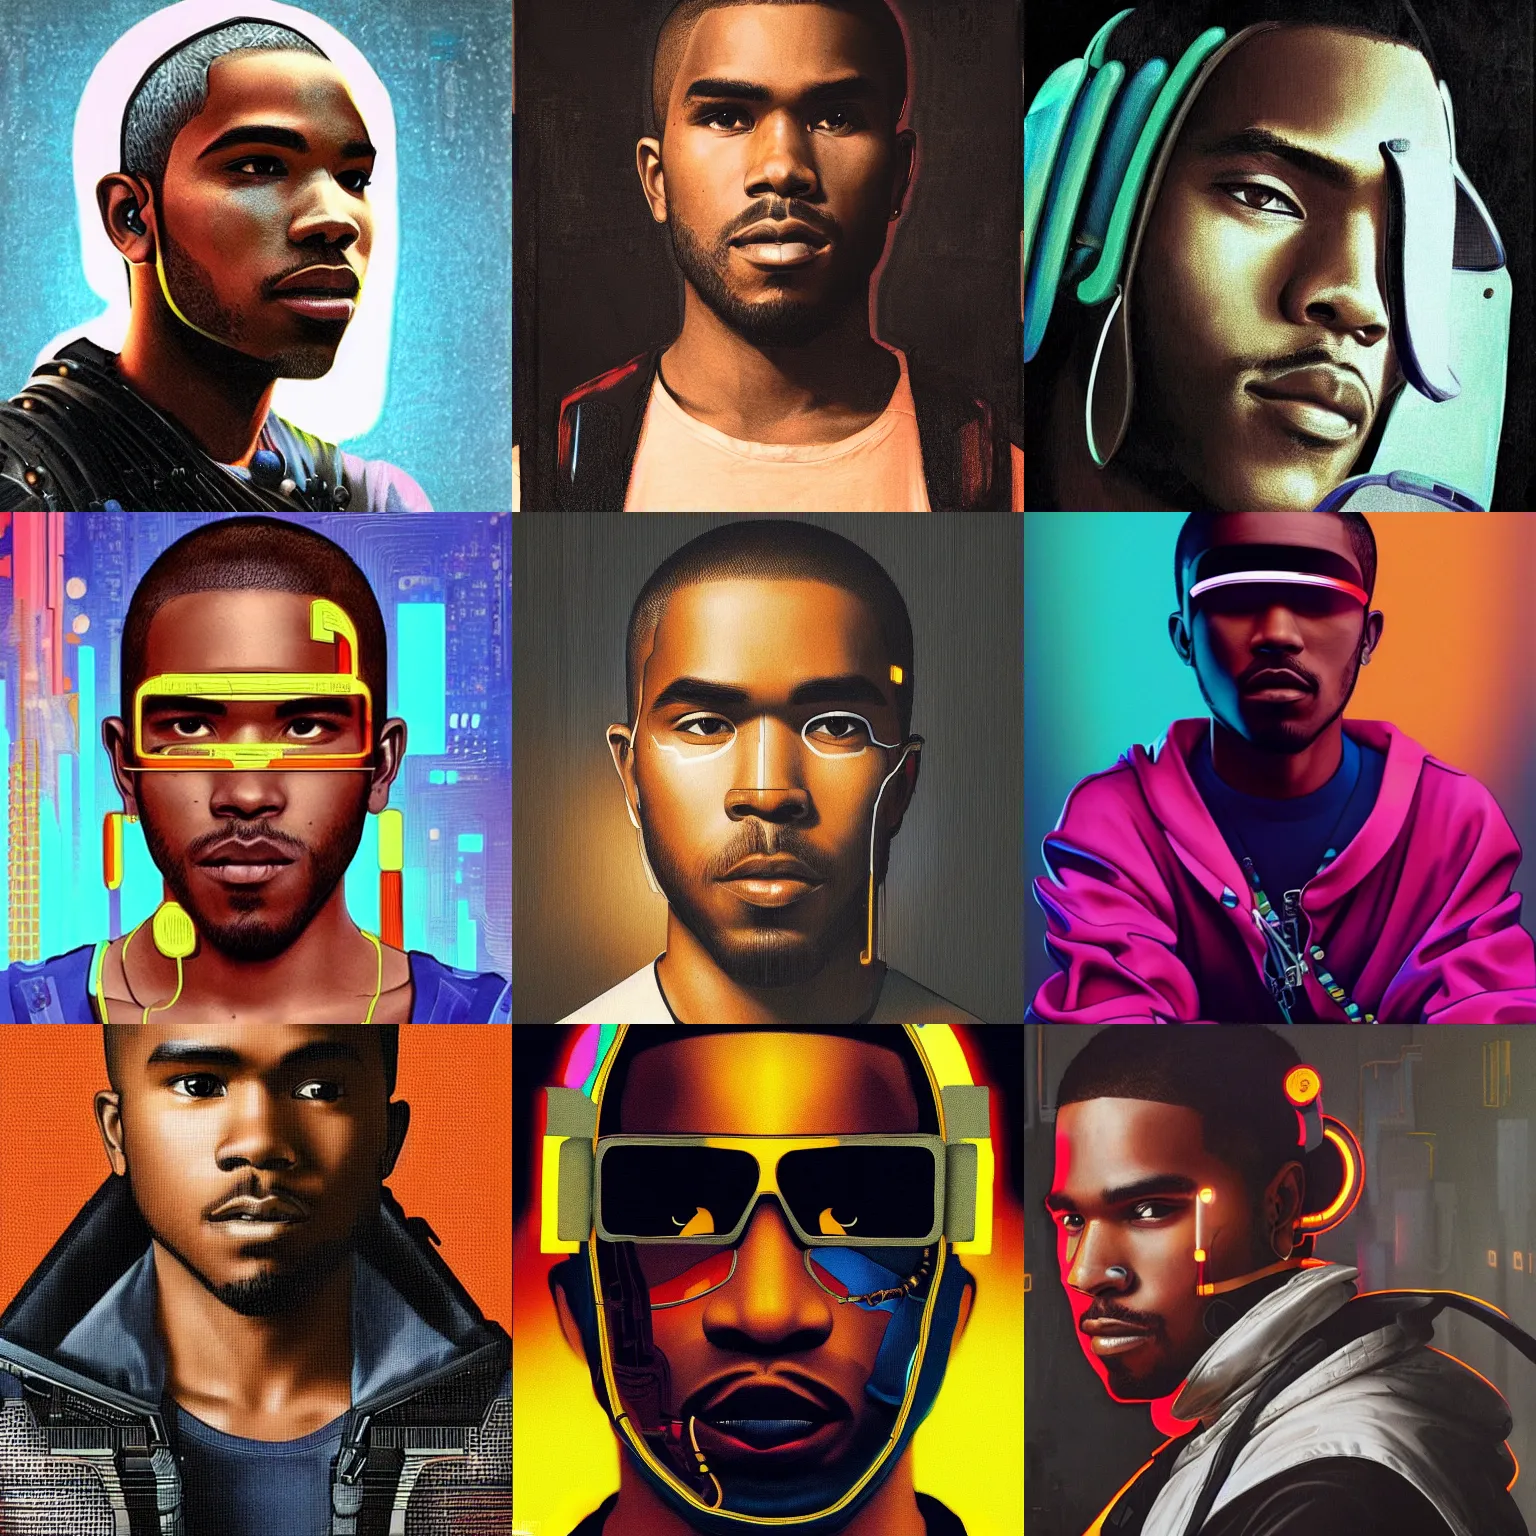 Prompt: a renaissance portrait of frank ocean as a cyberpunk character, highly detailed